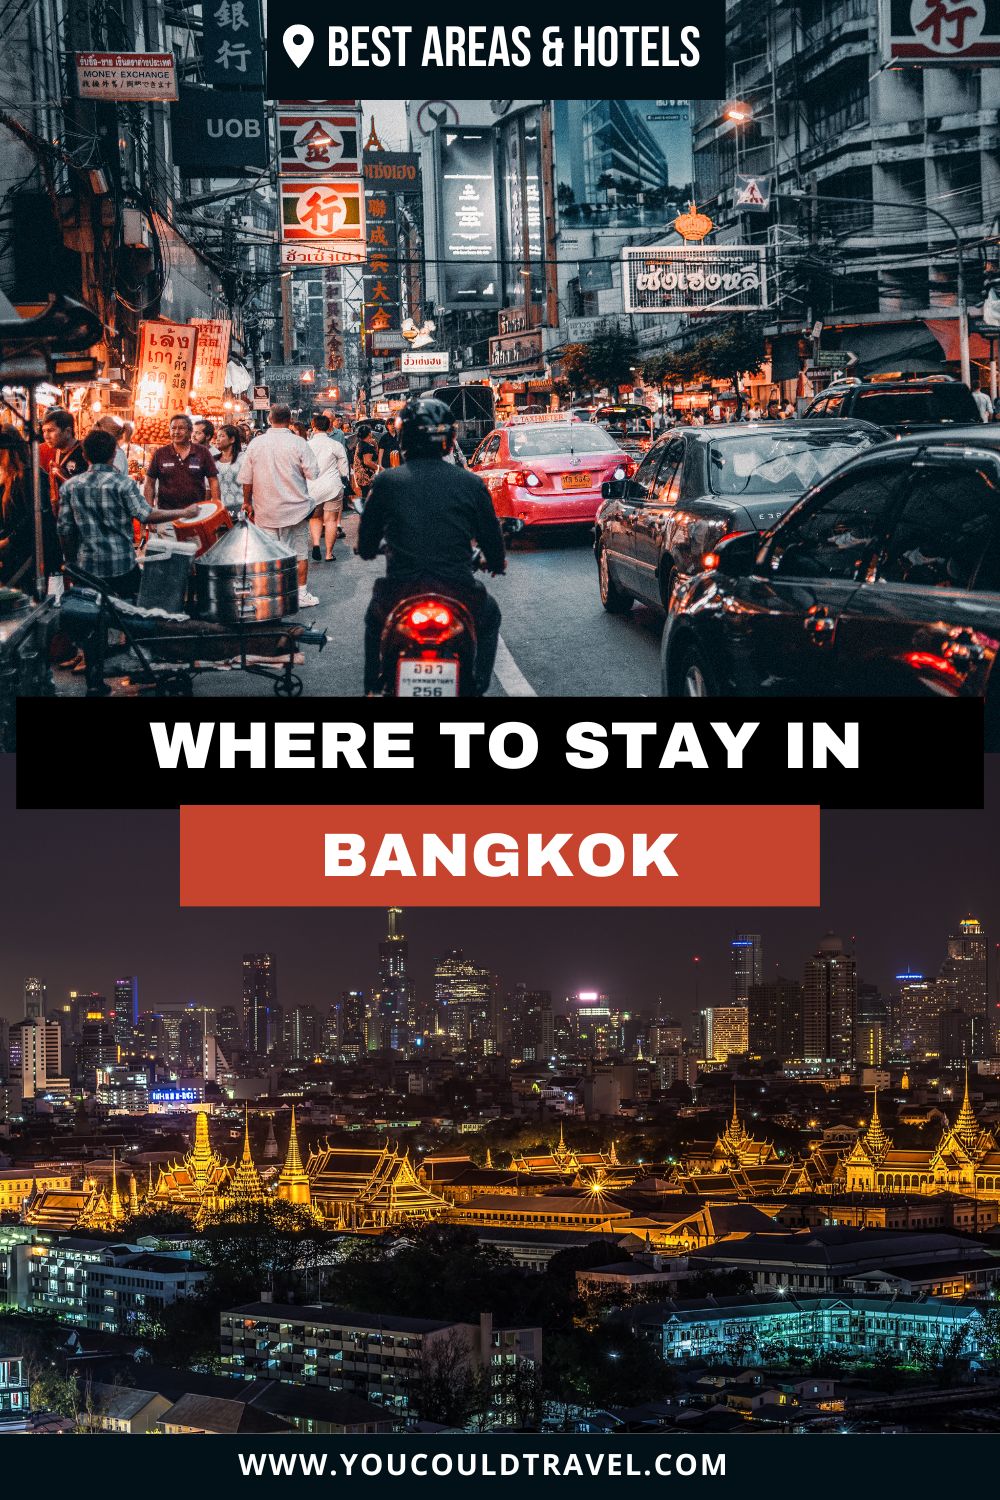 Best areas and hotels in Bangkok